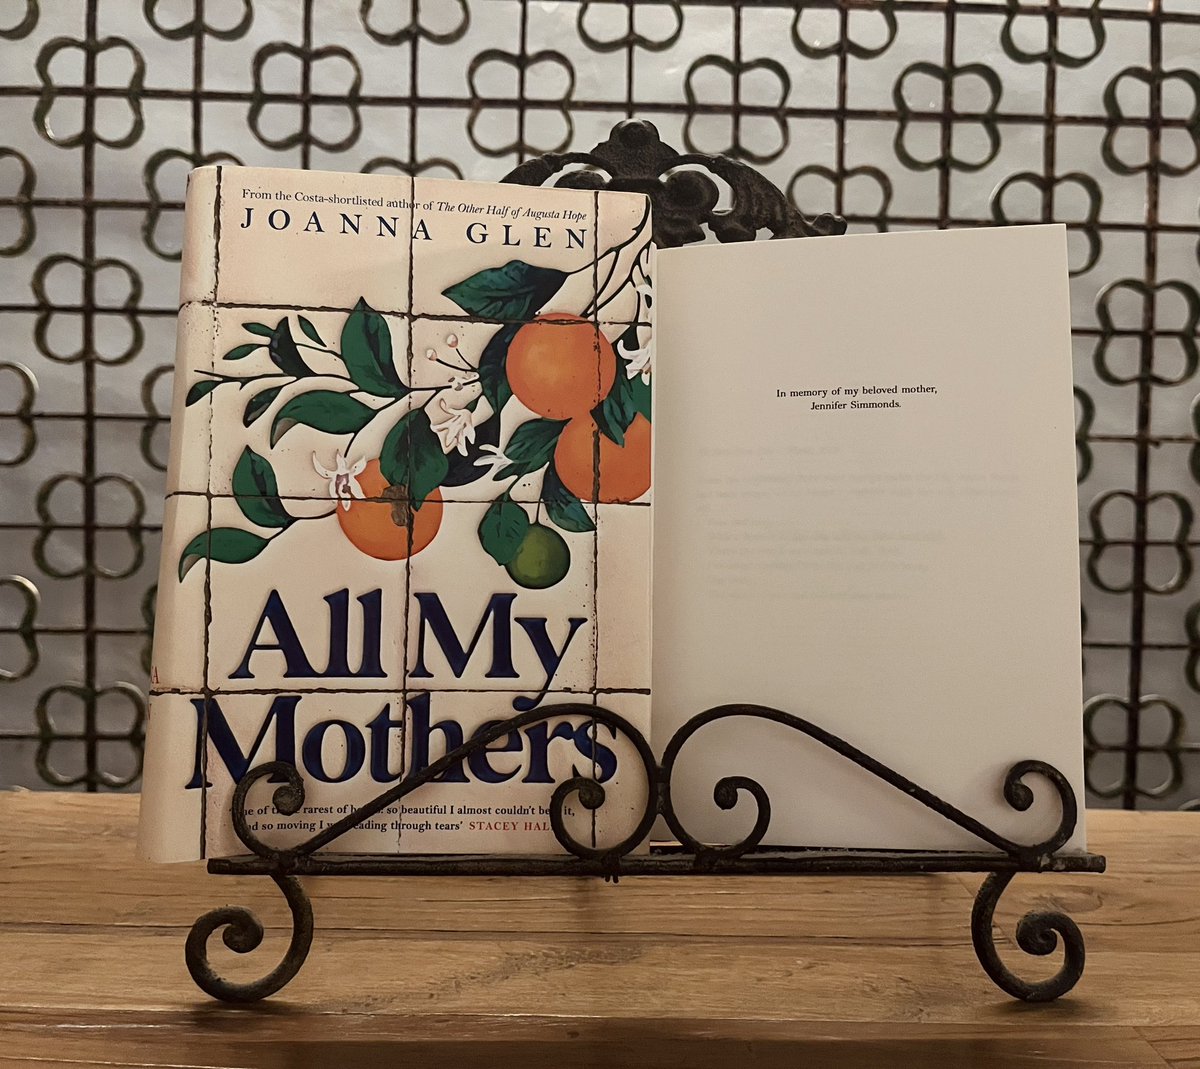 I wrote this book in memory of my beloved mother, who never saw me become an author. She was joy personified. In #AllMyMothers, I wanted to explore the myriad ways we can love and mother and to celebrate the many different people who make us who we are.